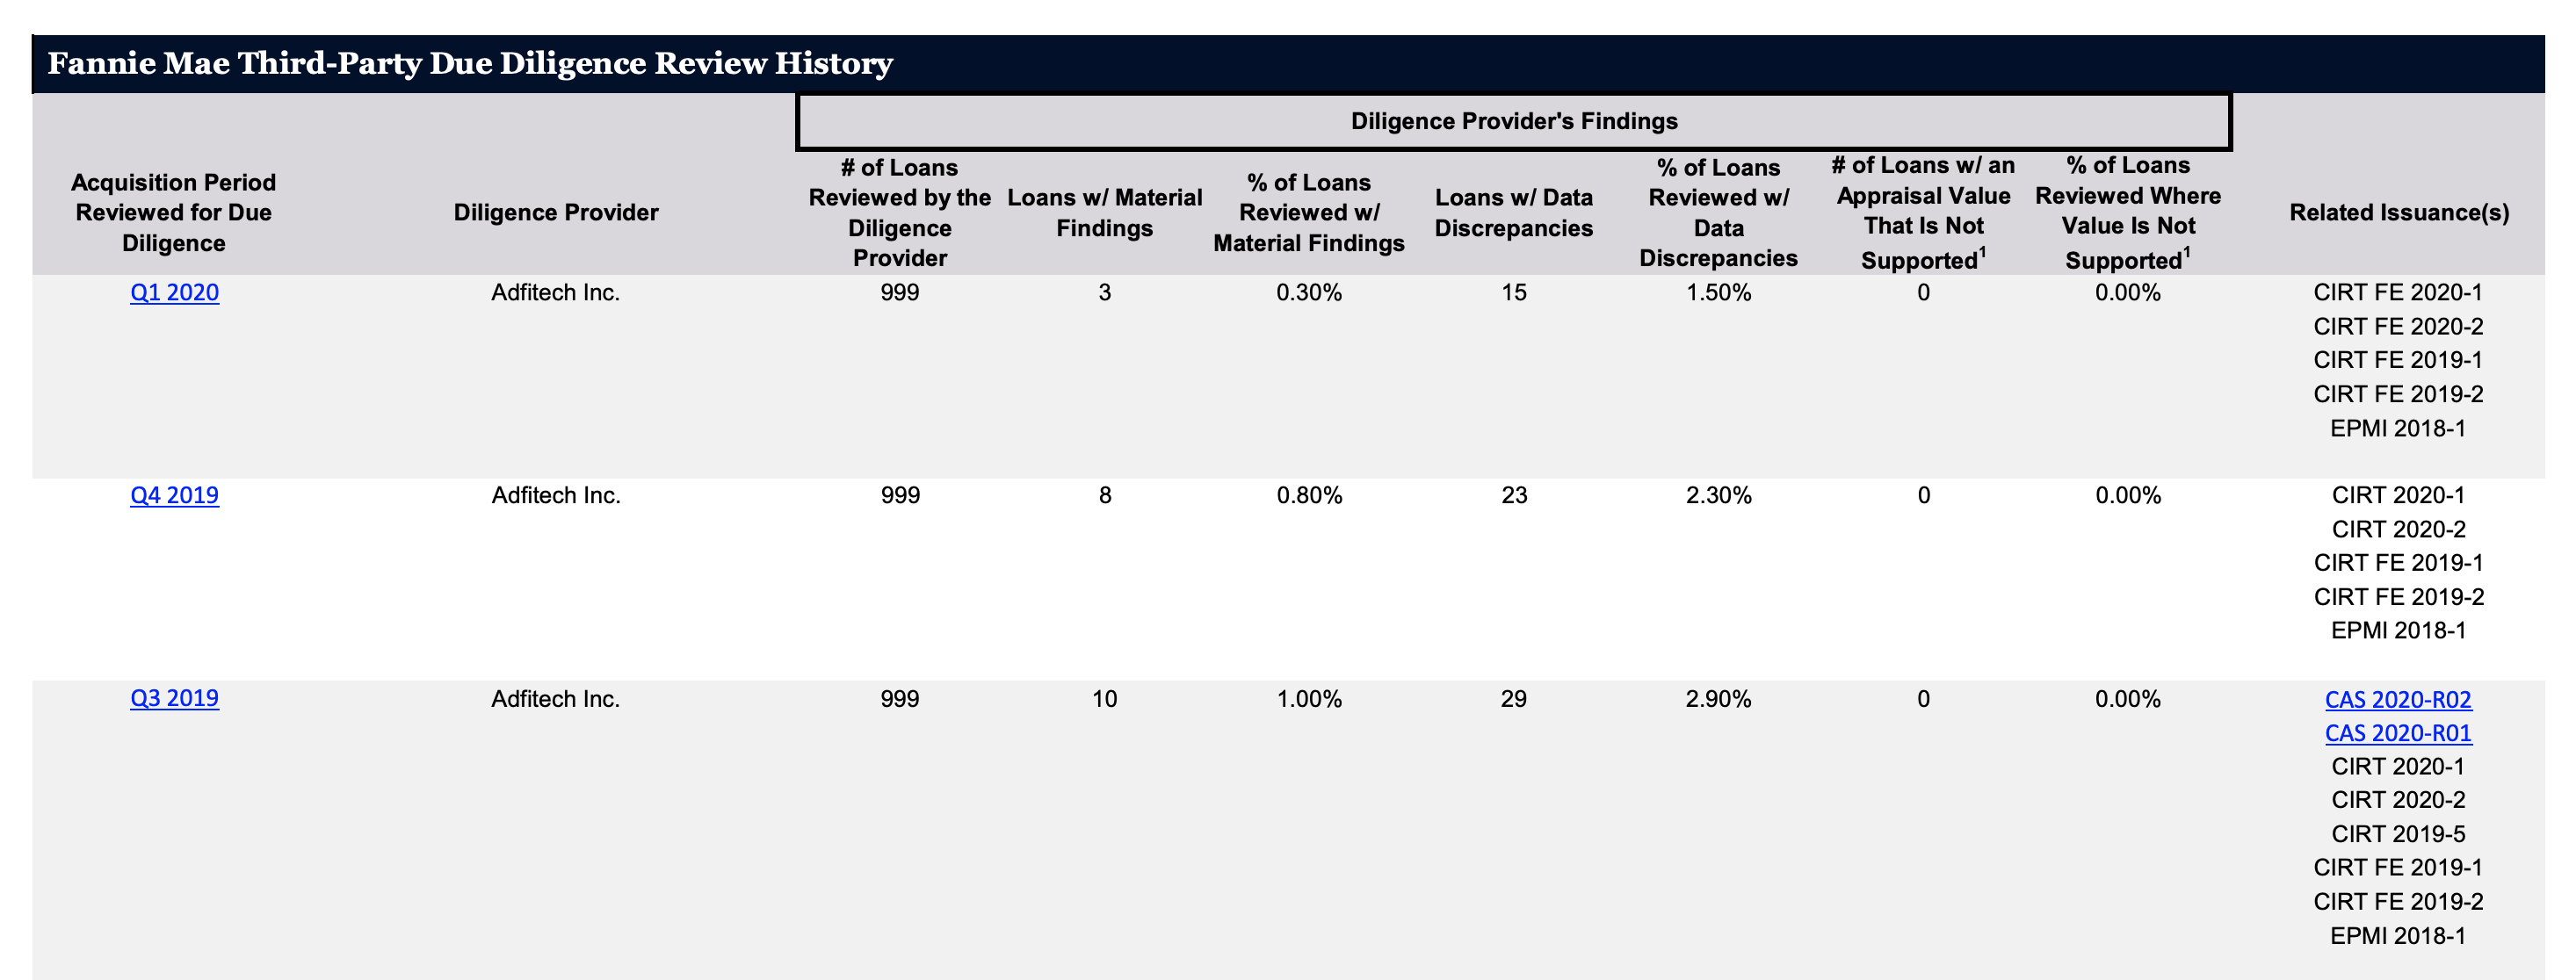 Fannie Mae Third-Party Due Diligence Review History